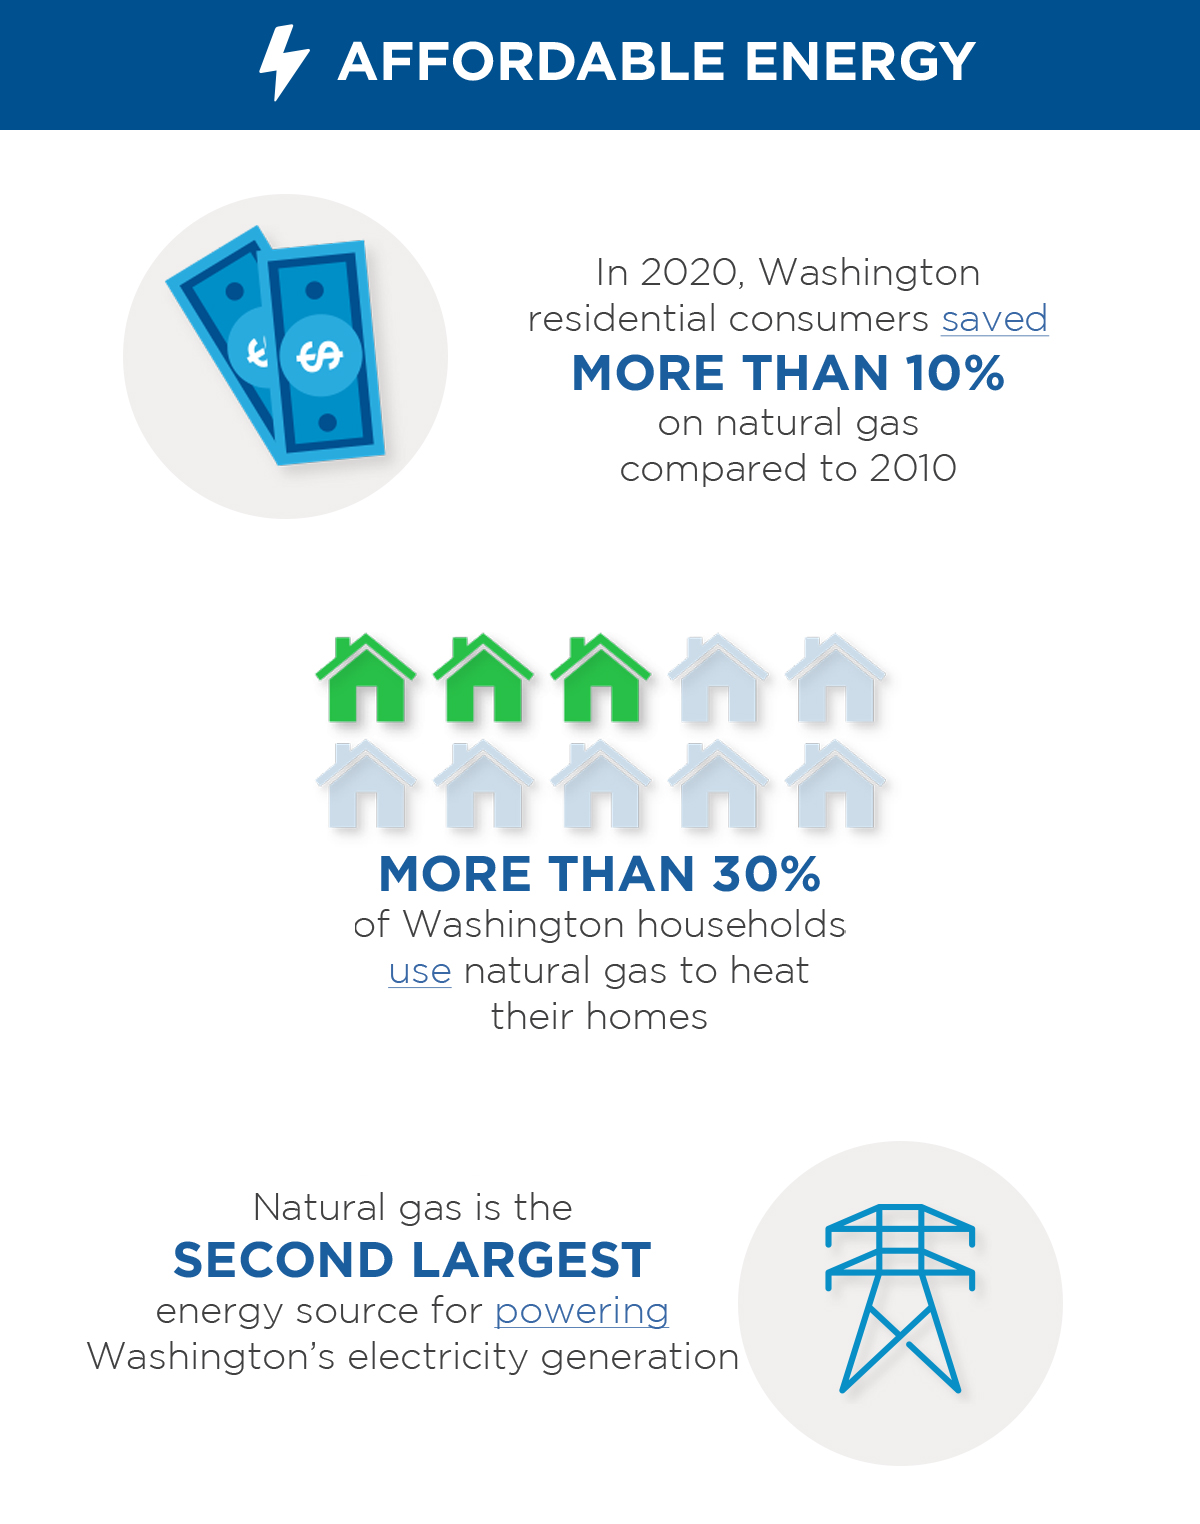 The benefits of natural gas for Washington